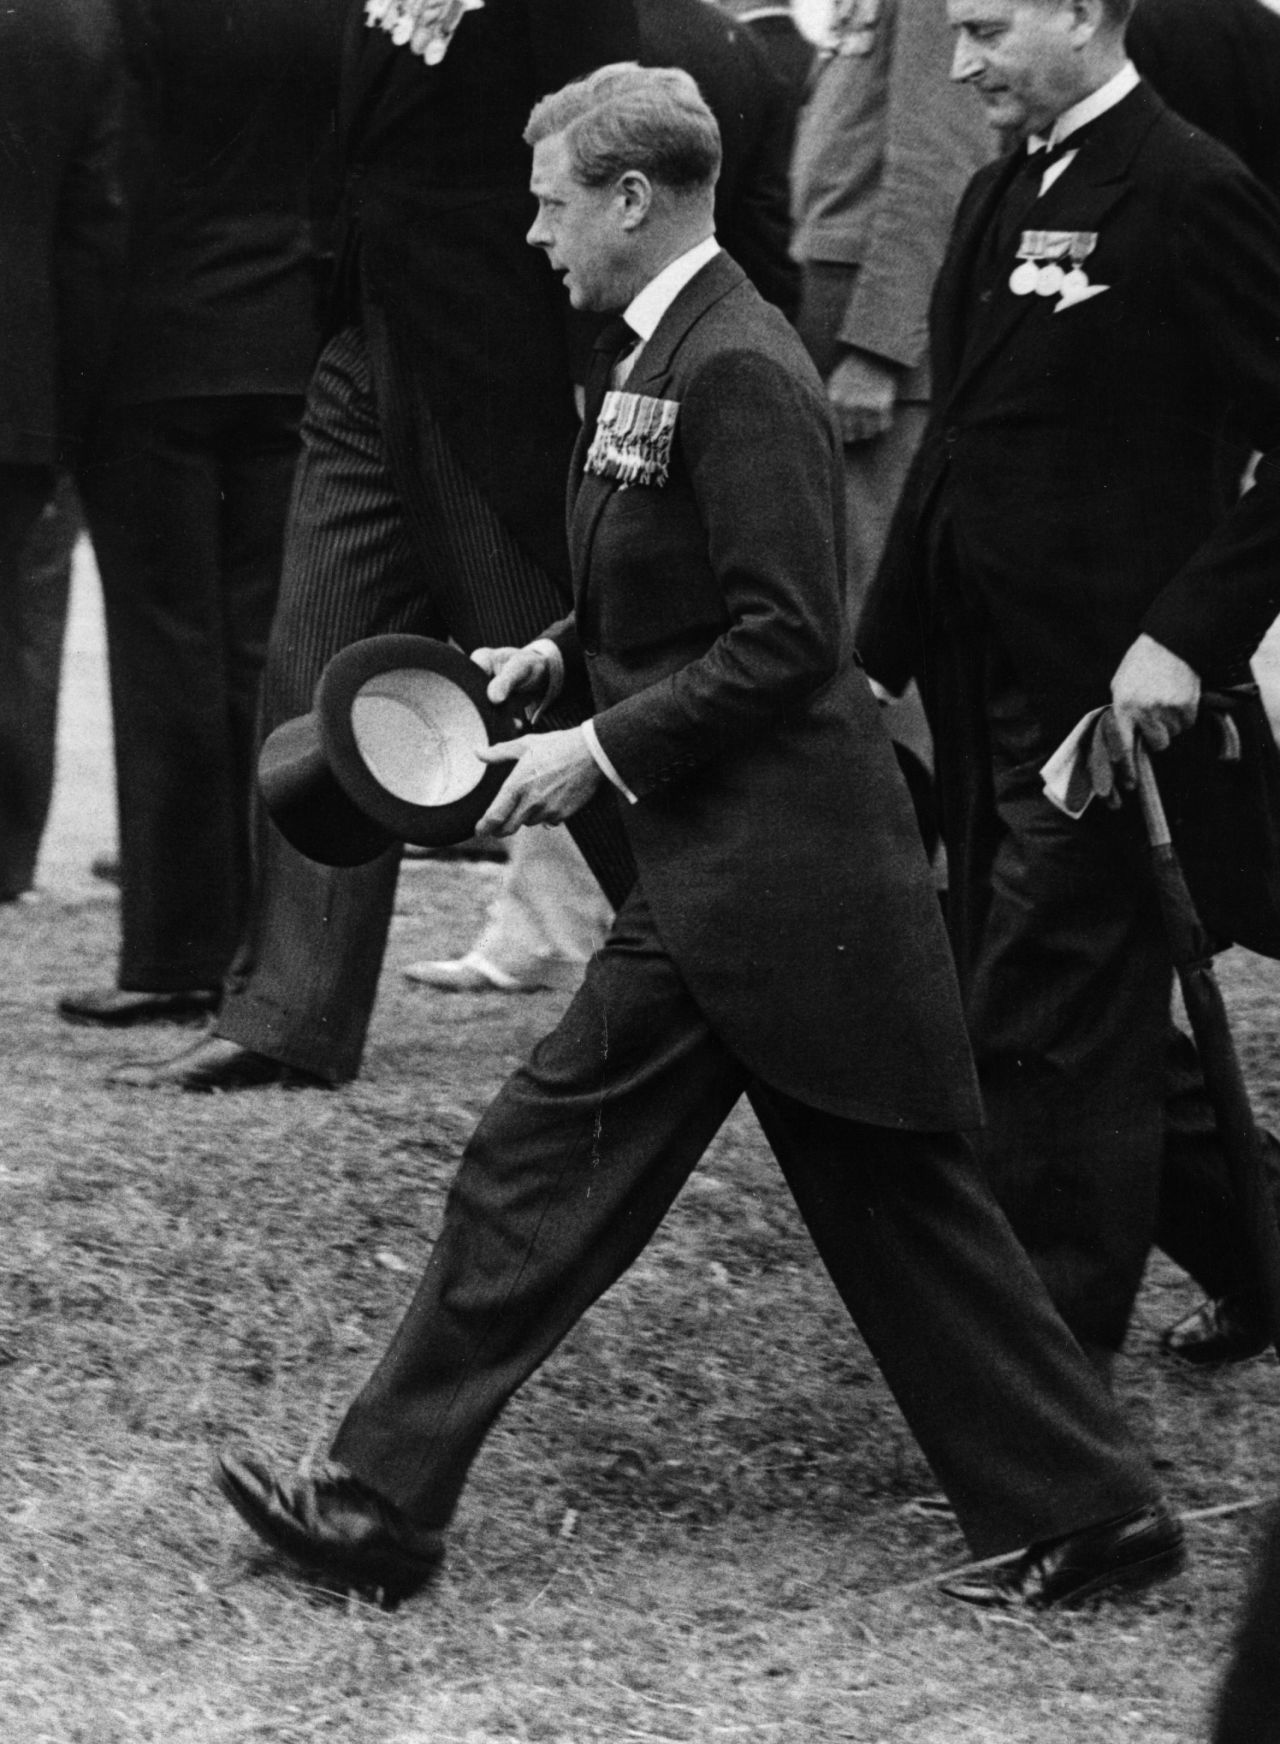 Edward VIII, pictured at the Canadian National Memorial at Vimy Memorial Ridge, France, in July 1936, ascends to the British throne on January 20, 1936, succeeding his father, King George V, upon his death.